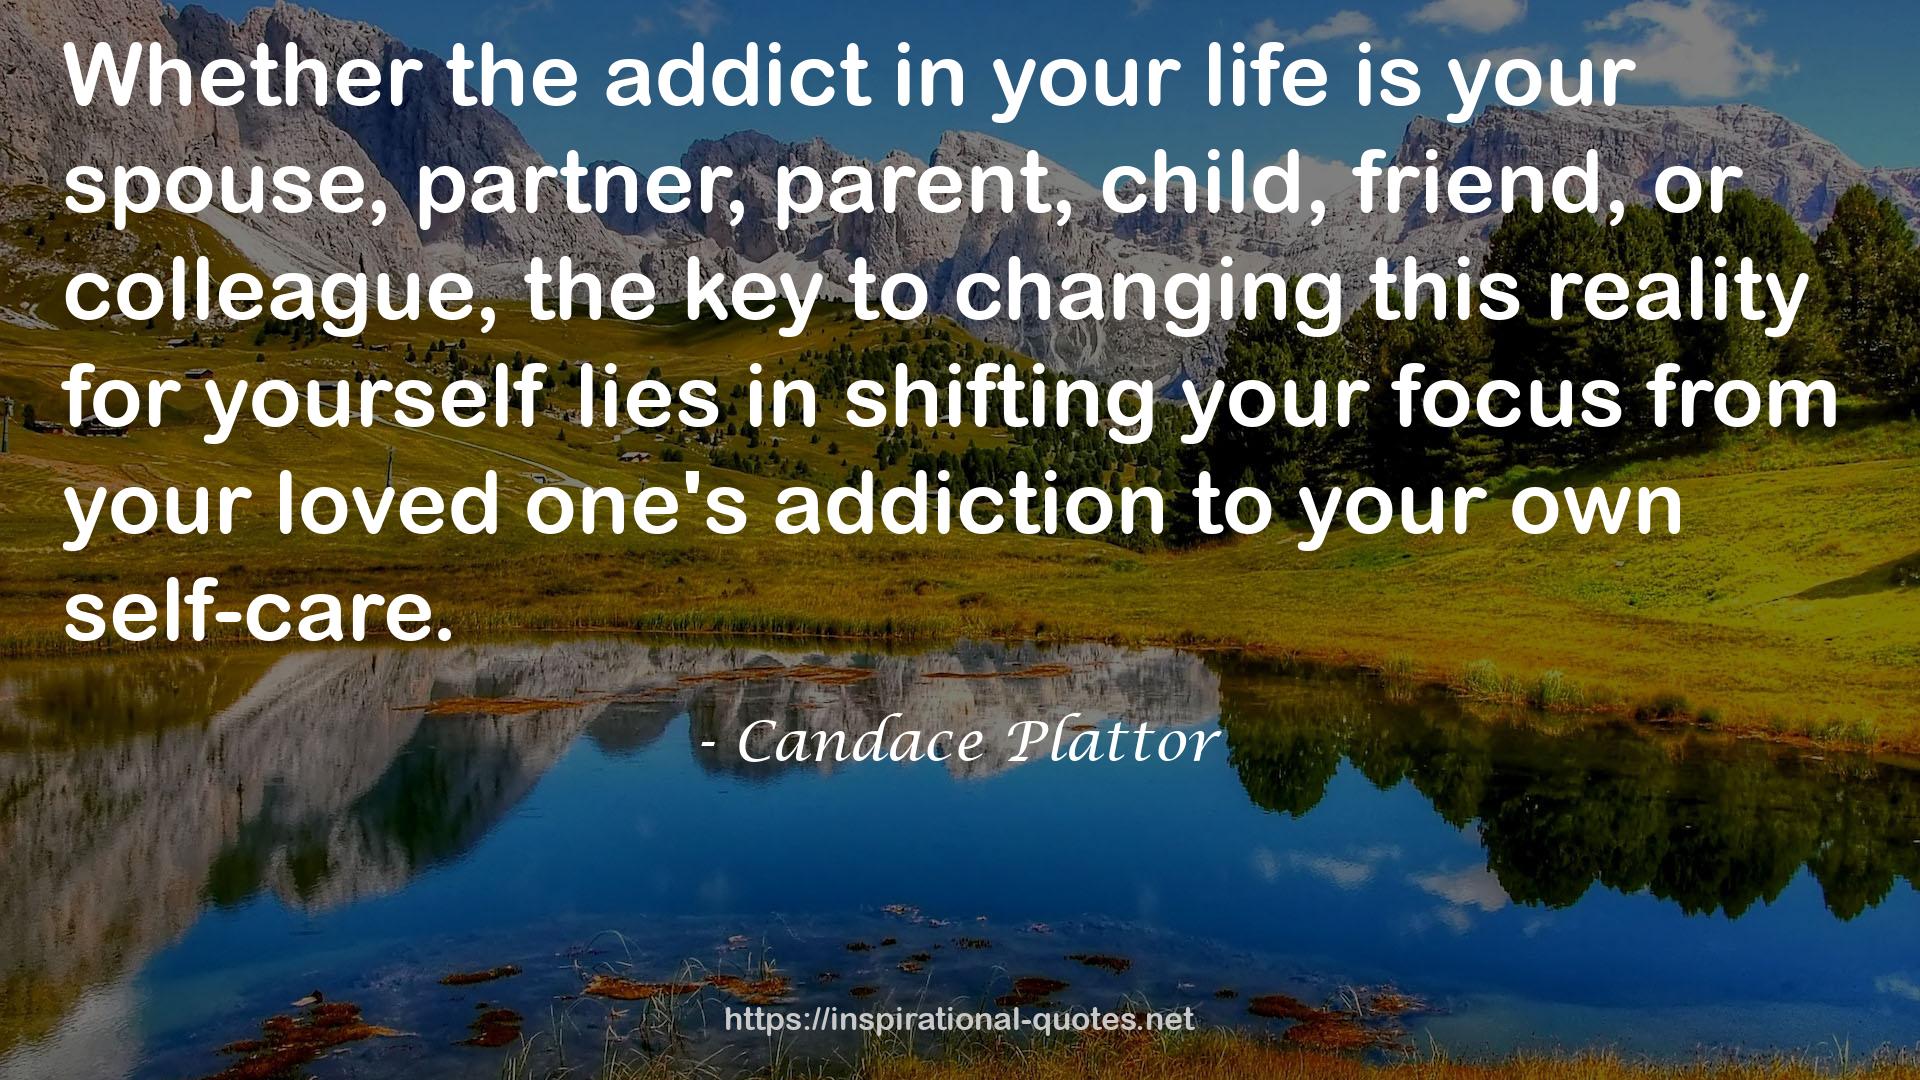 Candace Plattor QUOTES